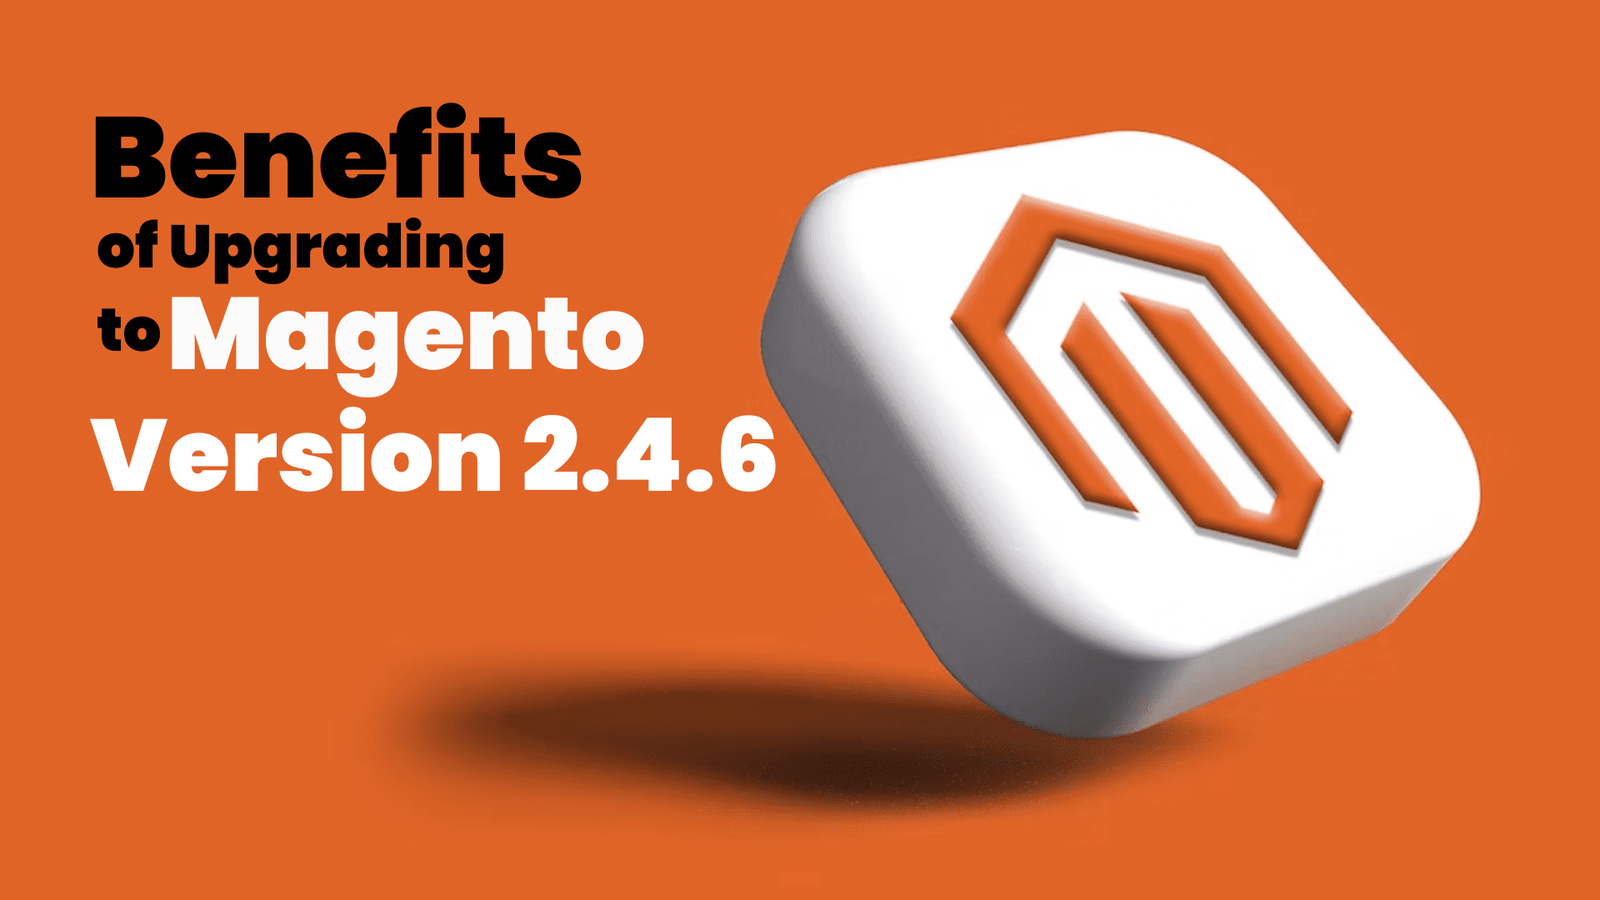 Benefits of Upgrading to Magento Version 2.4.6